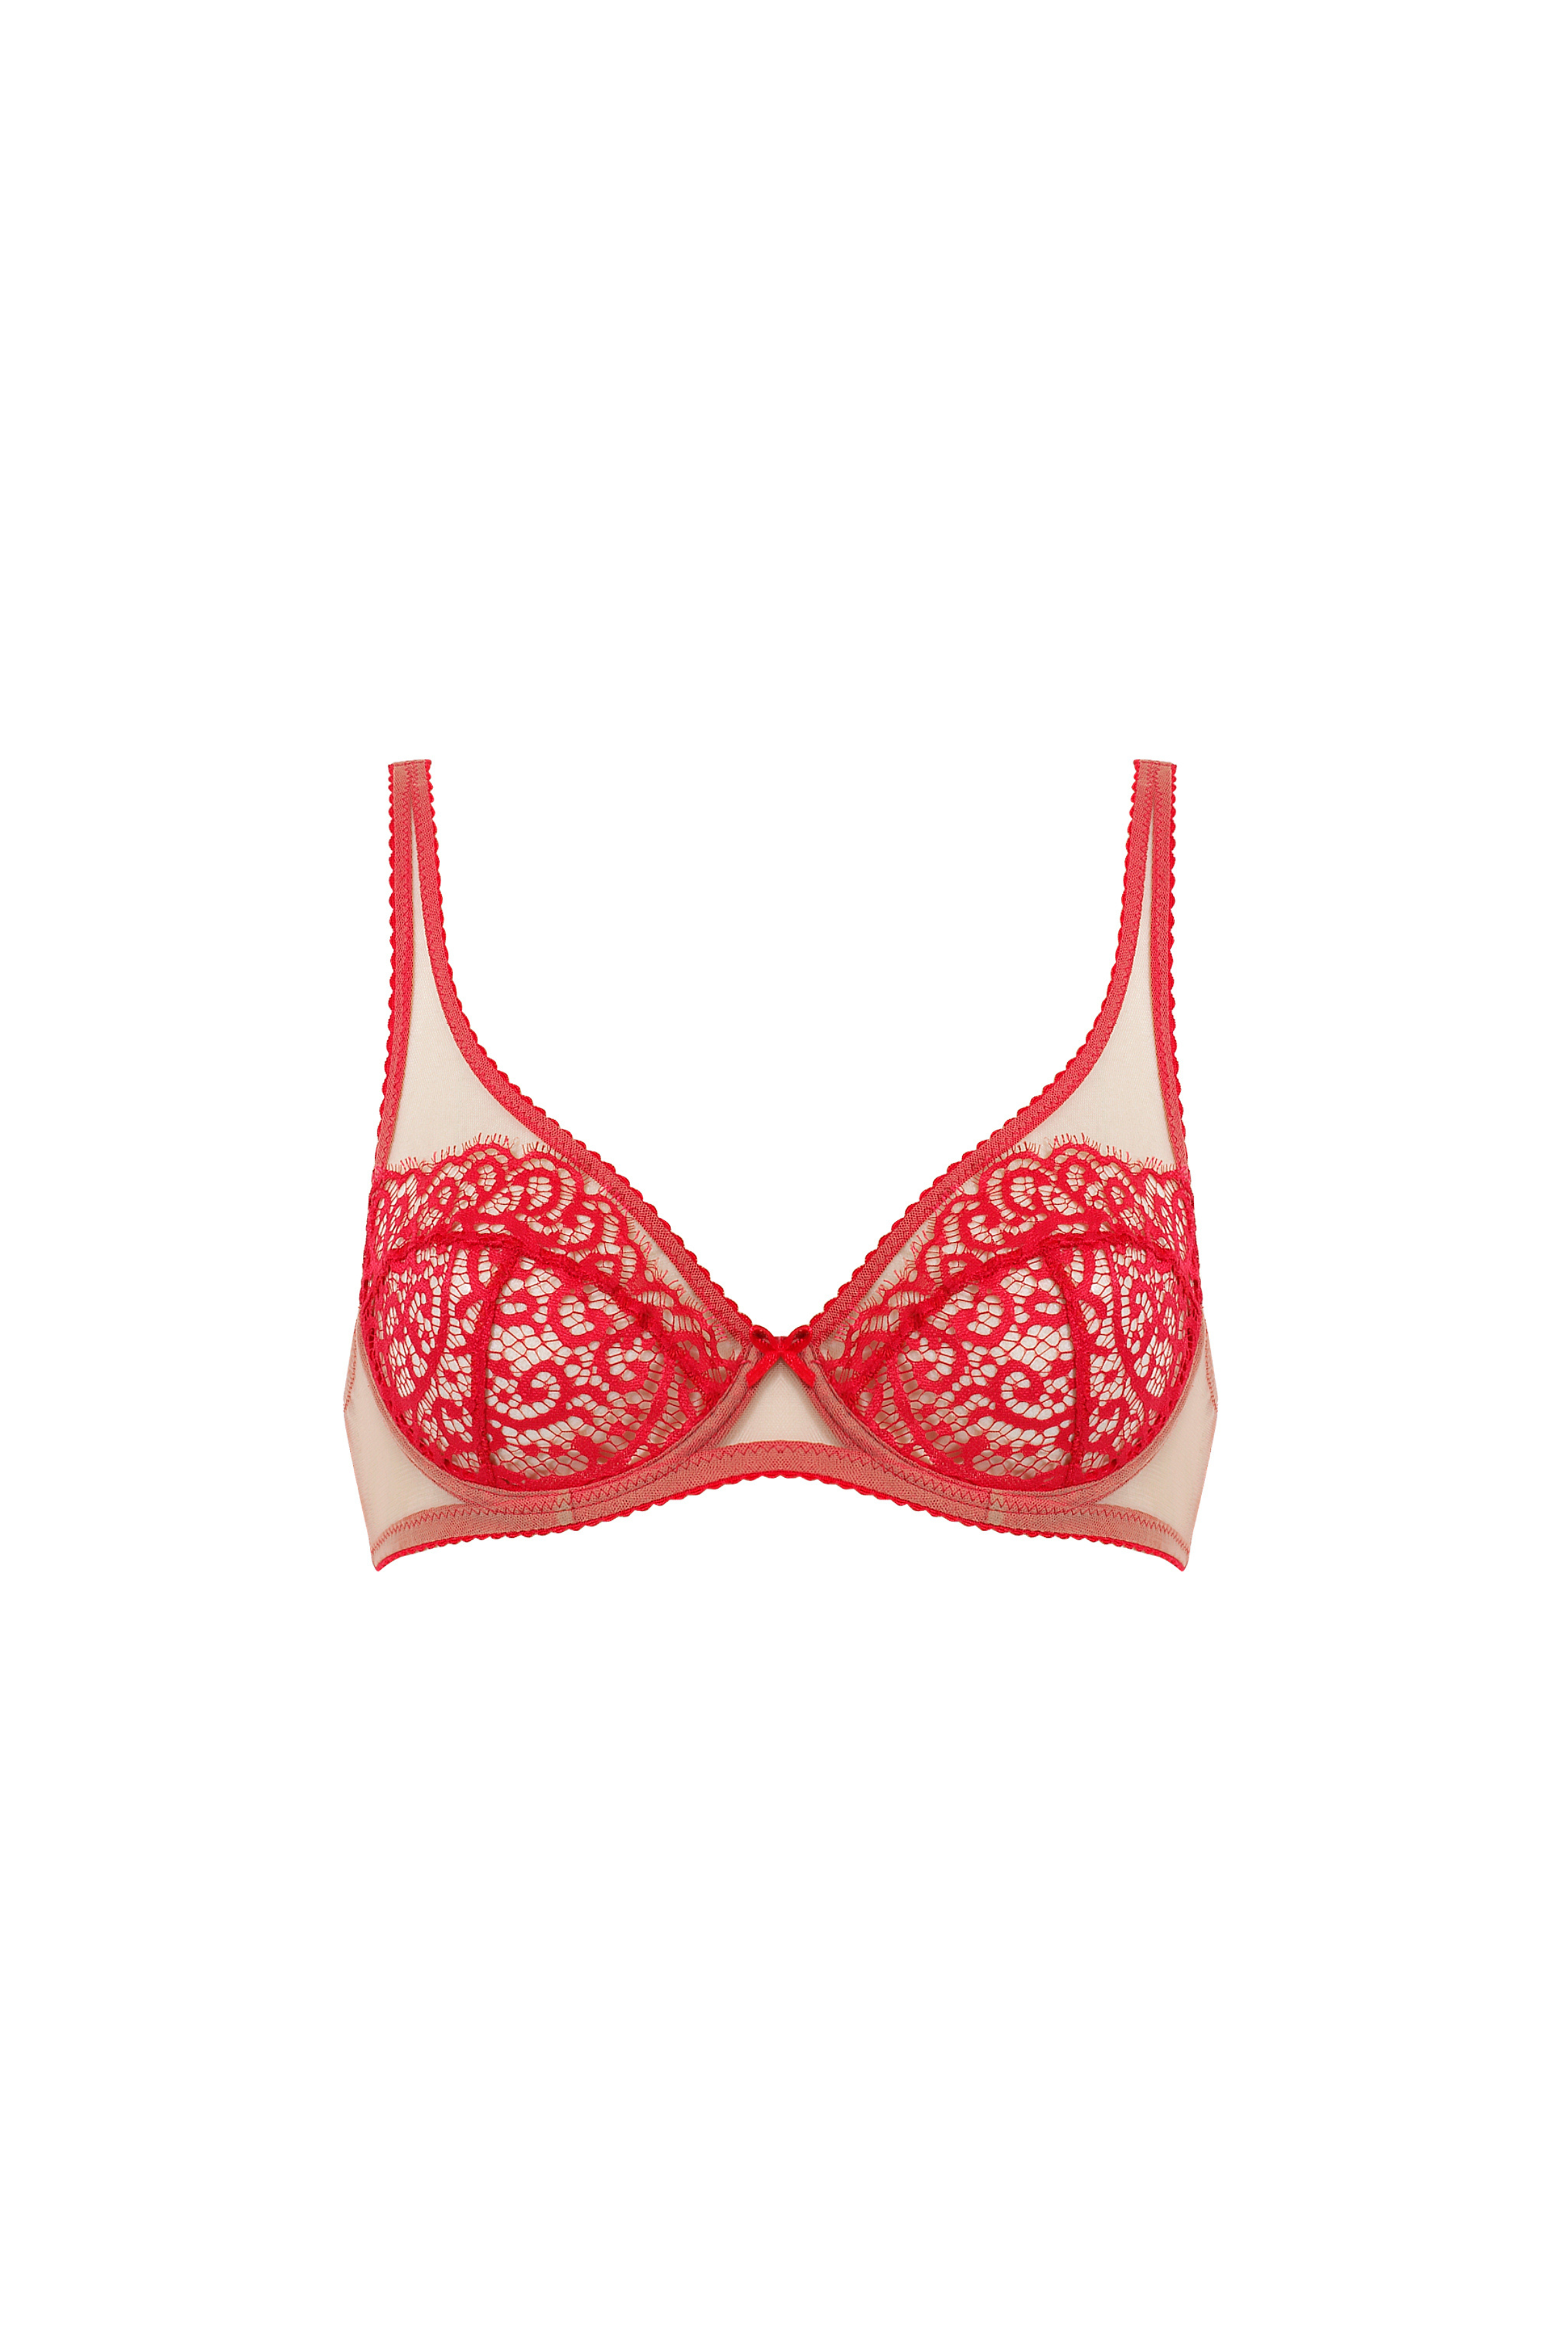 Red 32DDD BODY BY VICTORIA BRA & red lace panty your